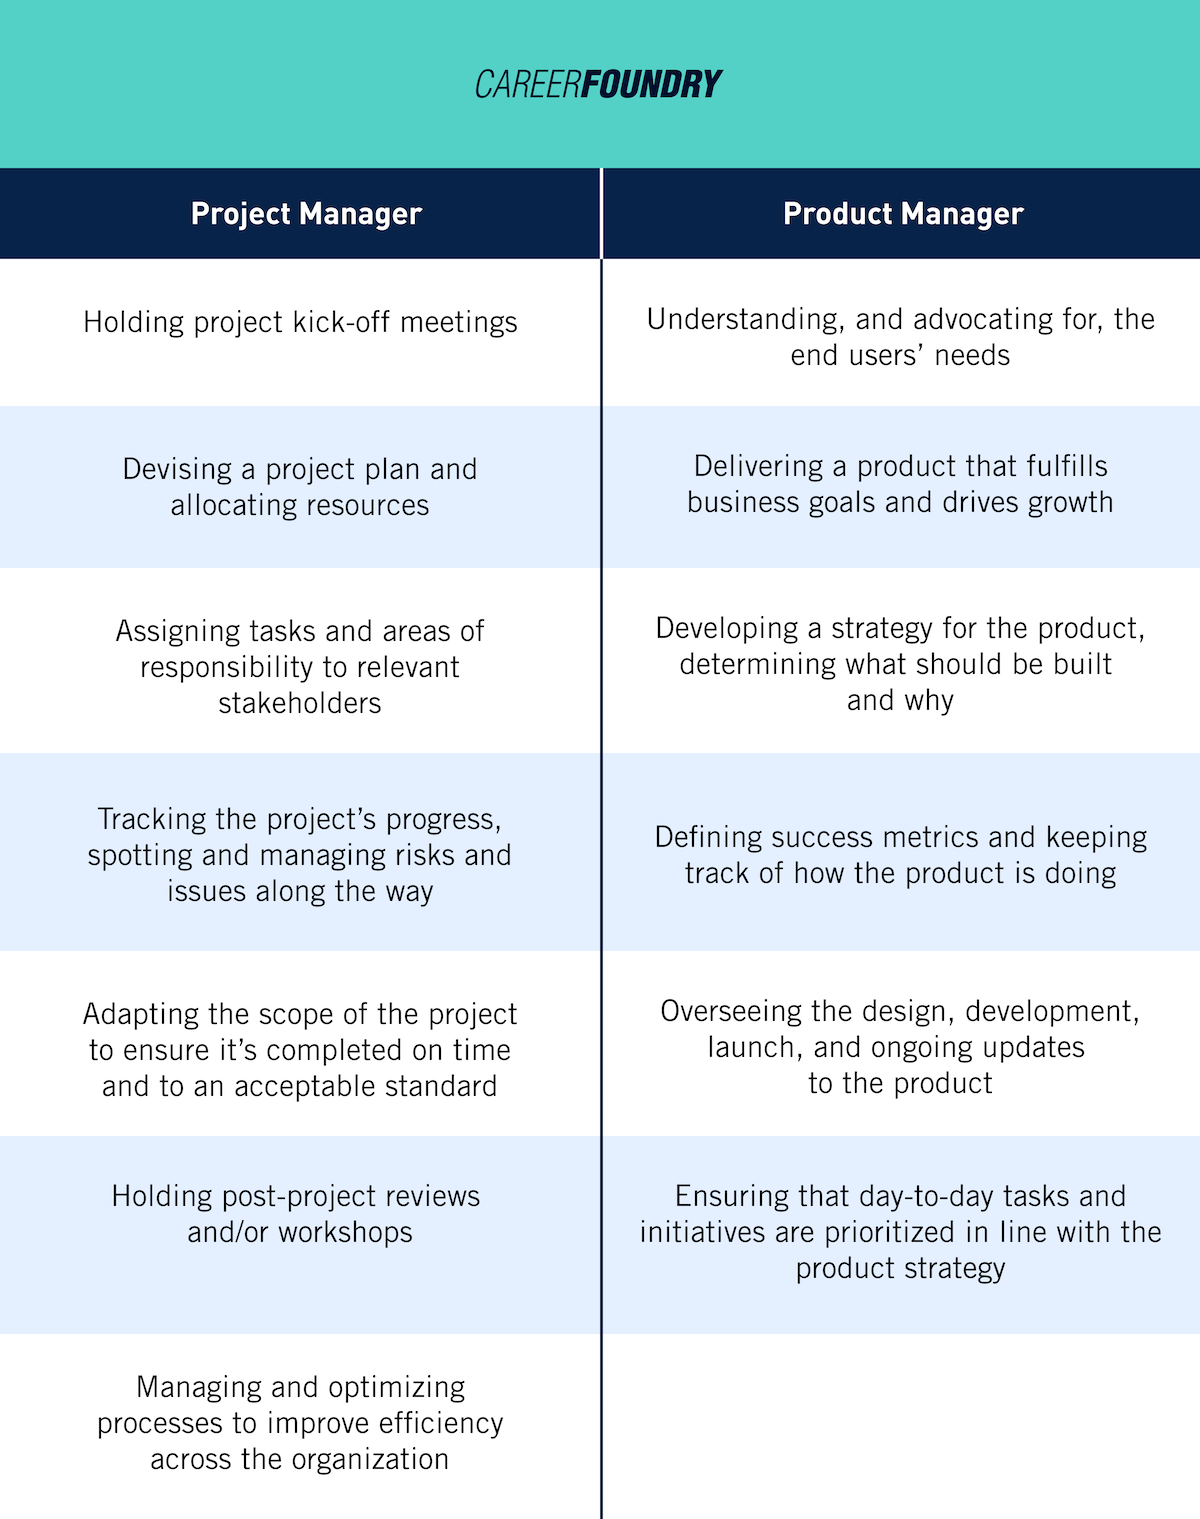 A chart comparing the tasks of the Product Manager vs Project Manager roles.